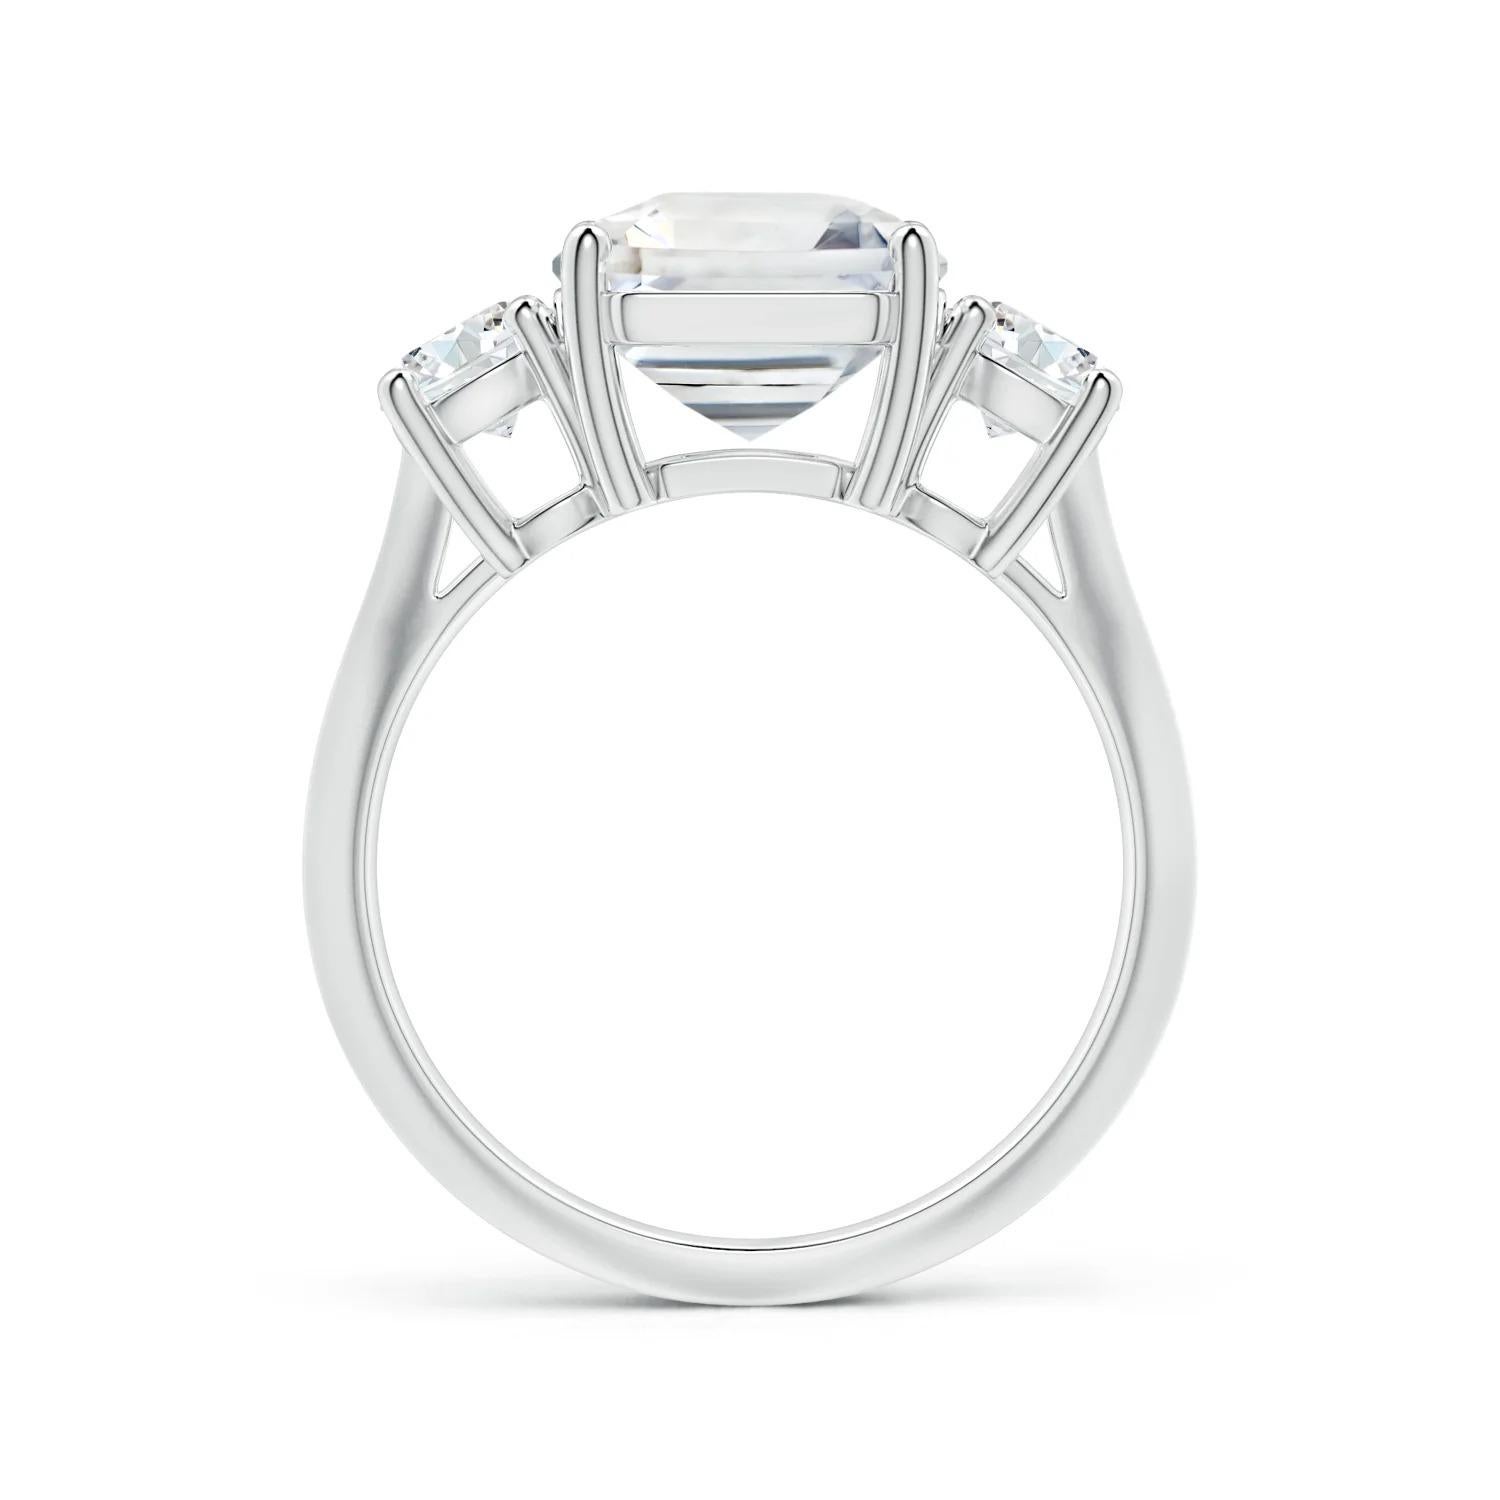 For Sale:  Angara Three Stone Gia Certified Emerald-Cut White Sapphire Ring in White Gold 2